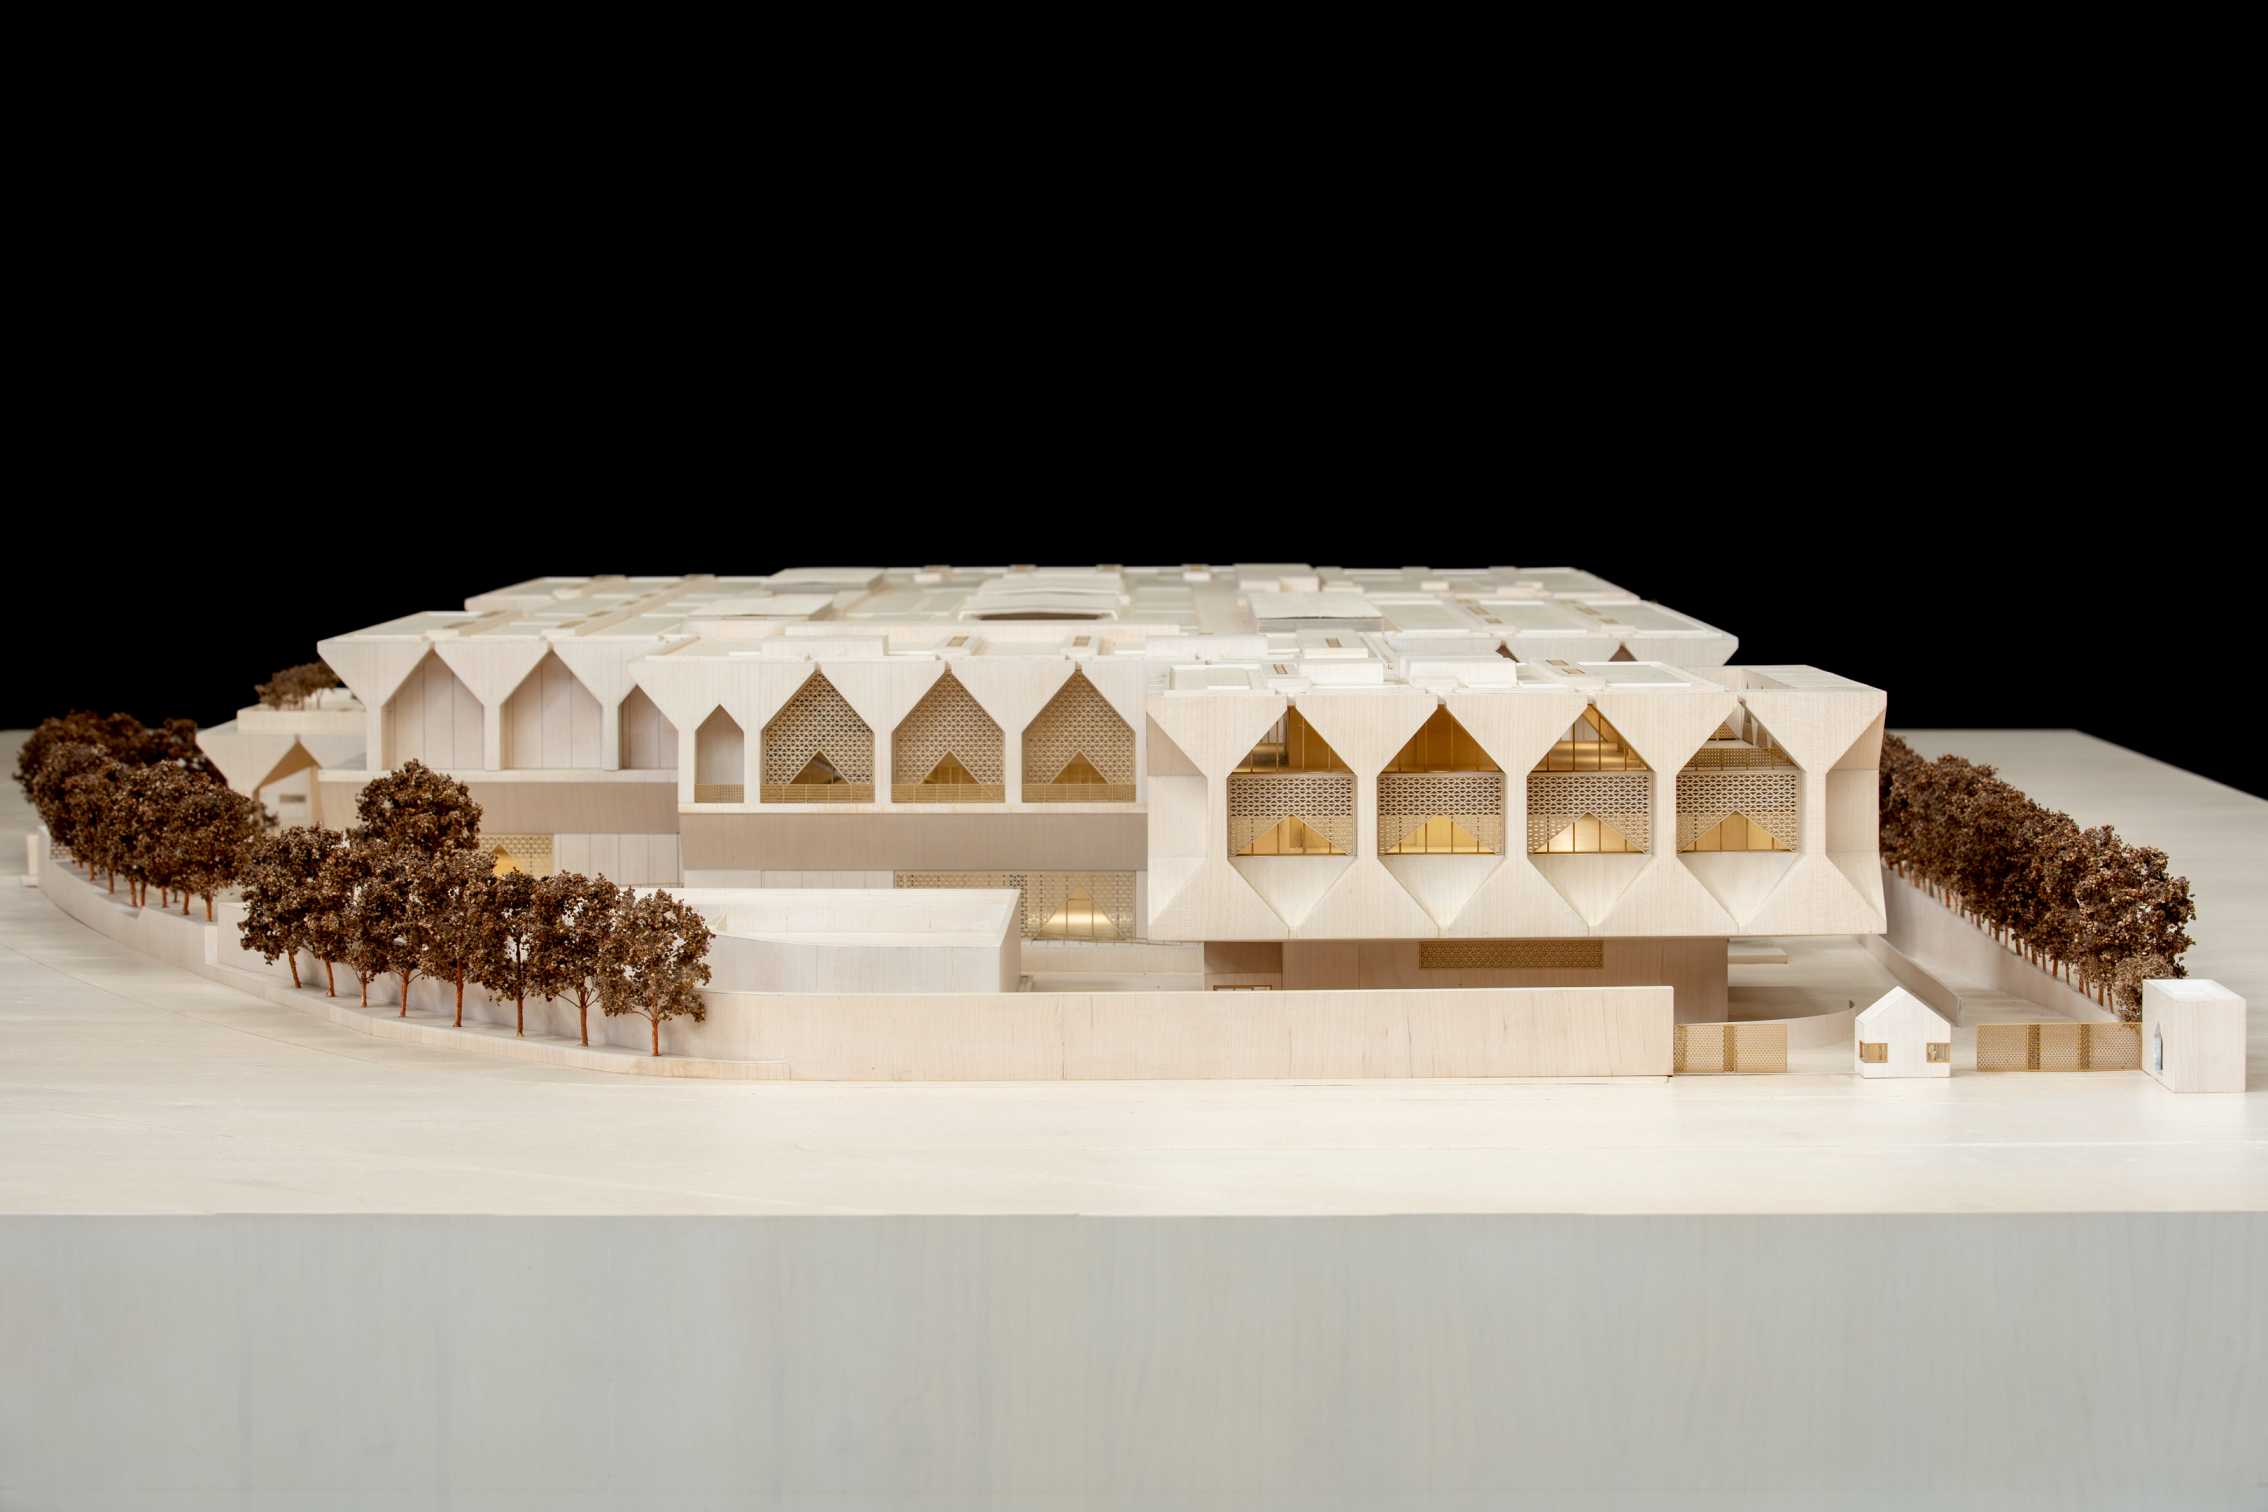 KNMA unveils architectural model of India’s largest cultural center in Delhi